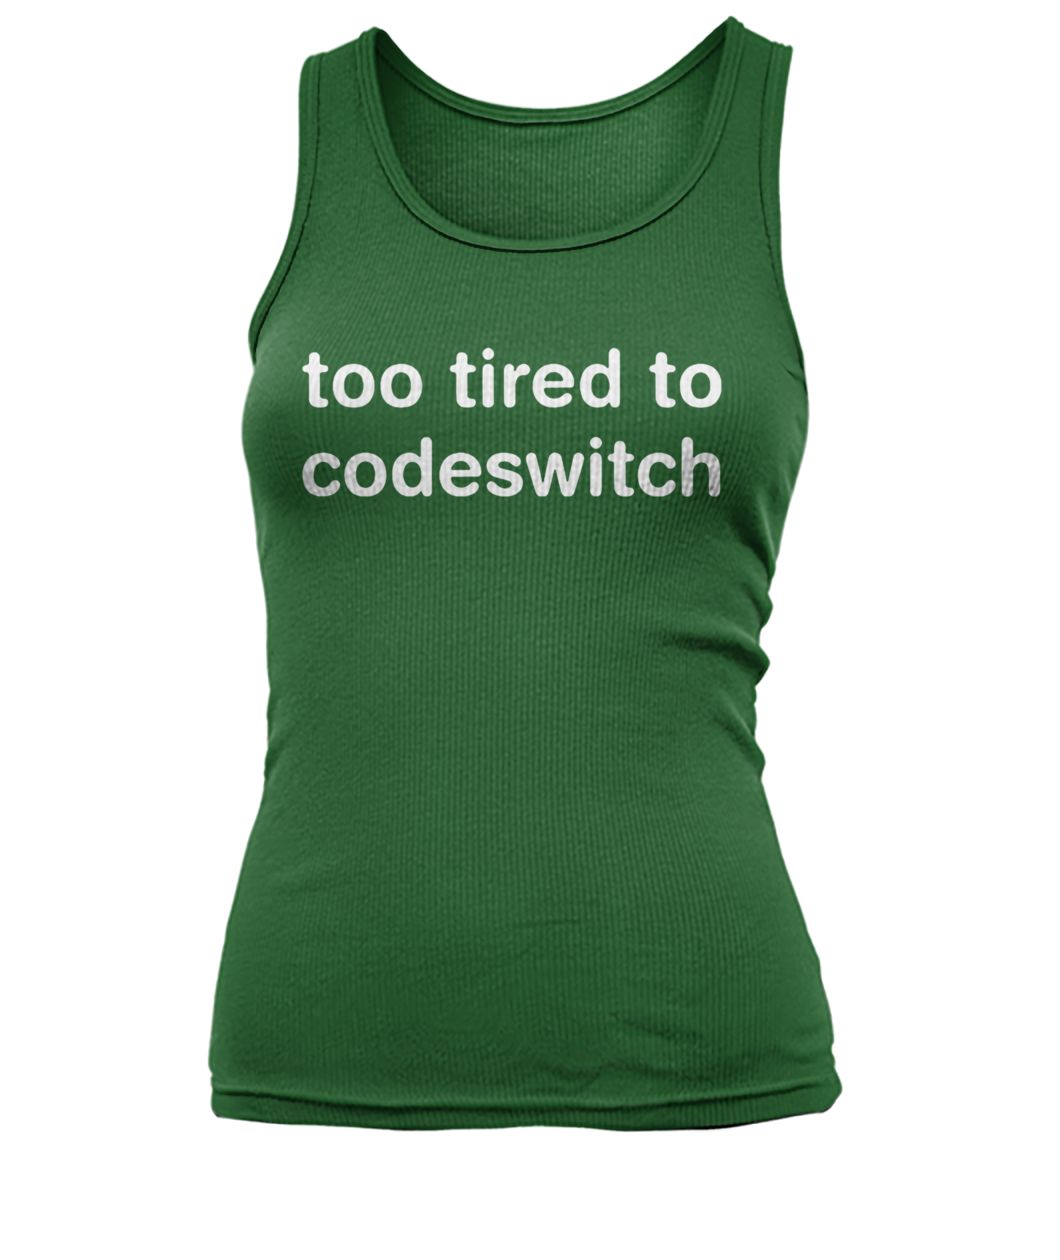 Too tired to codeswitch women's tank top